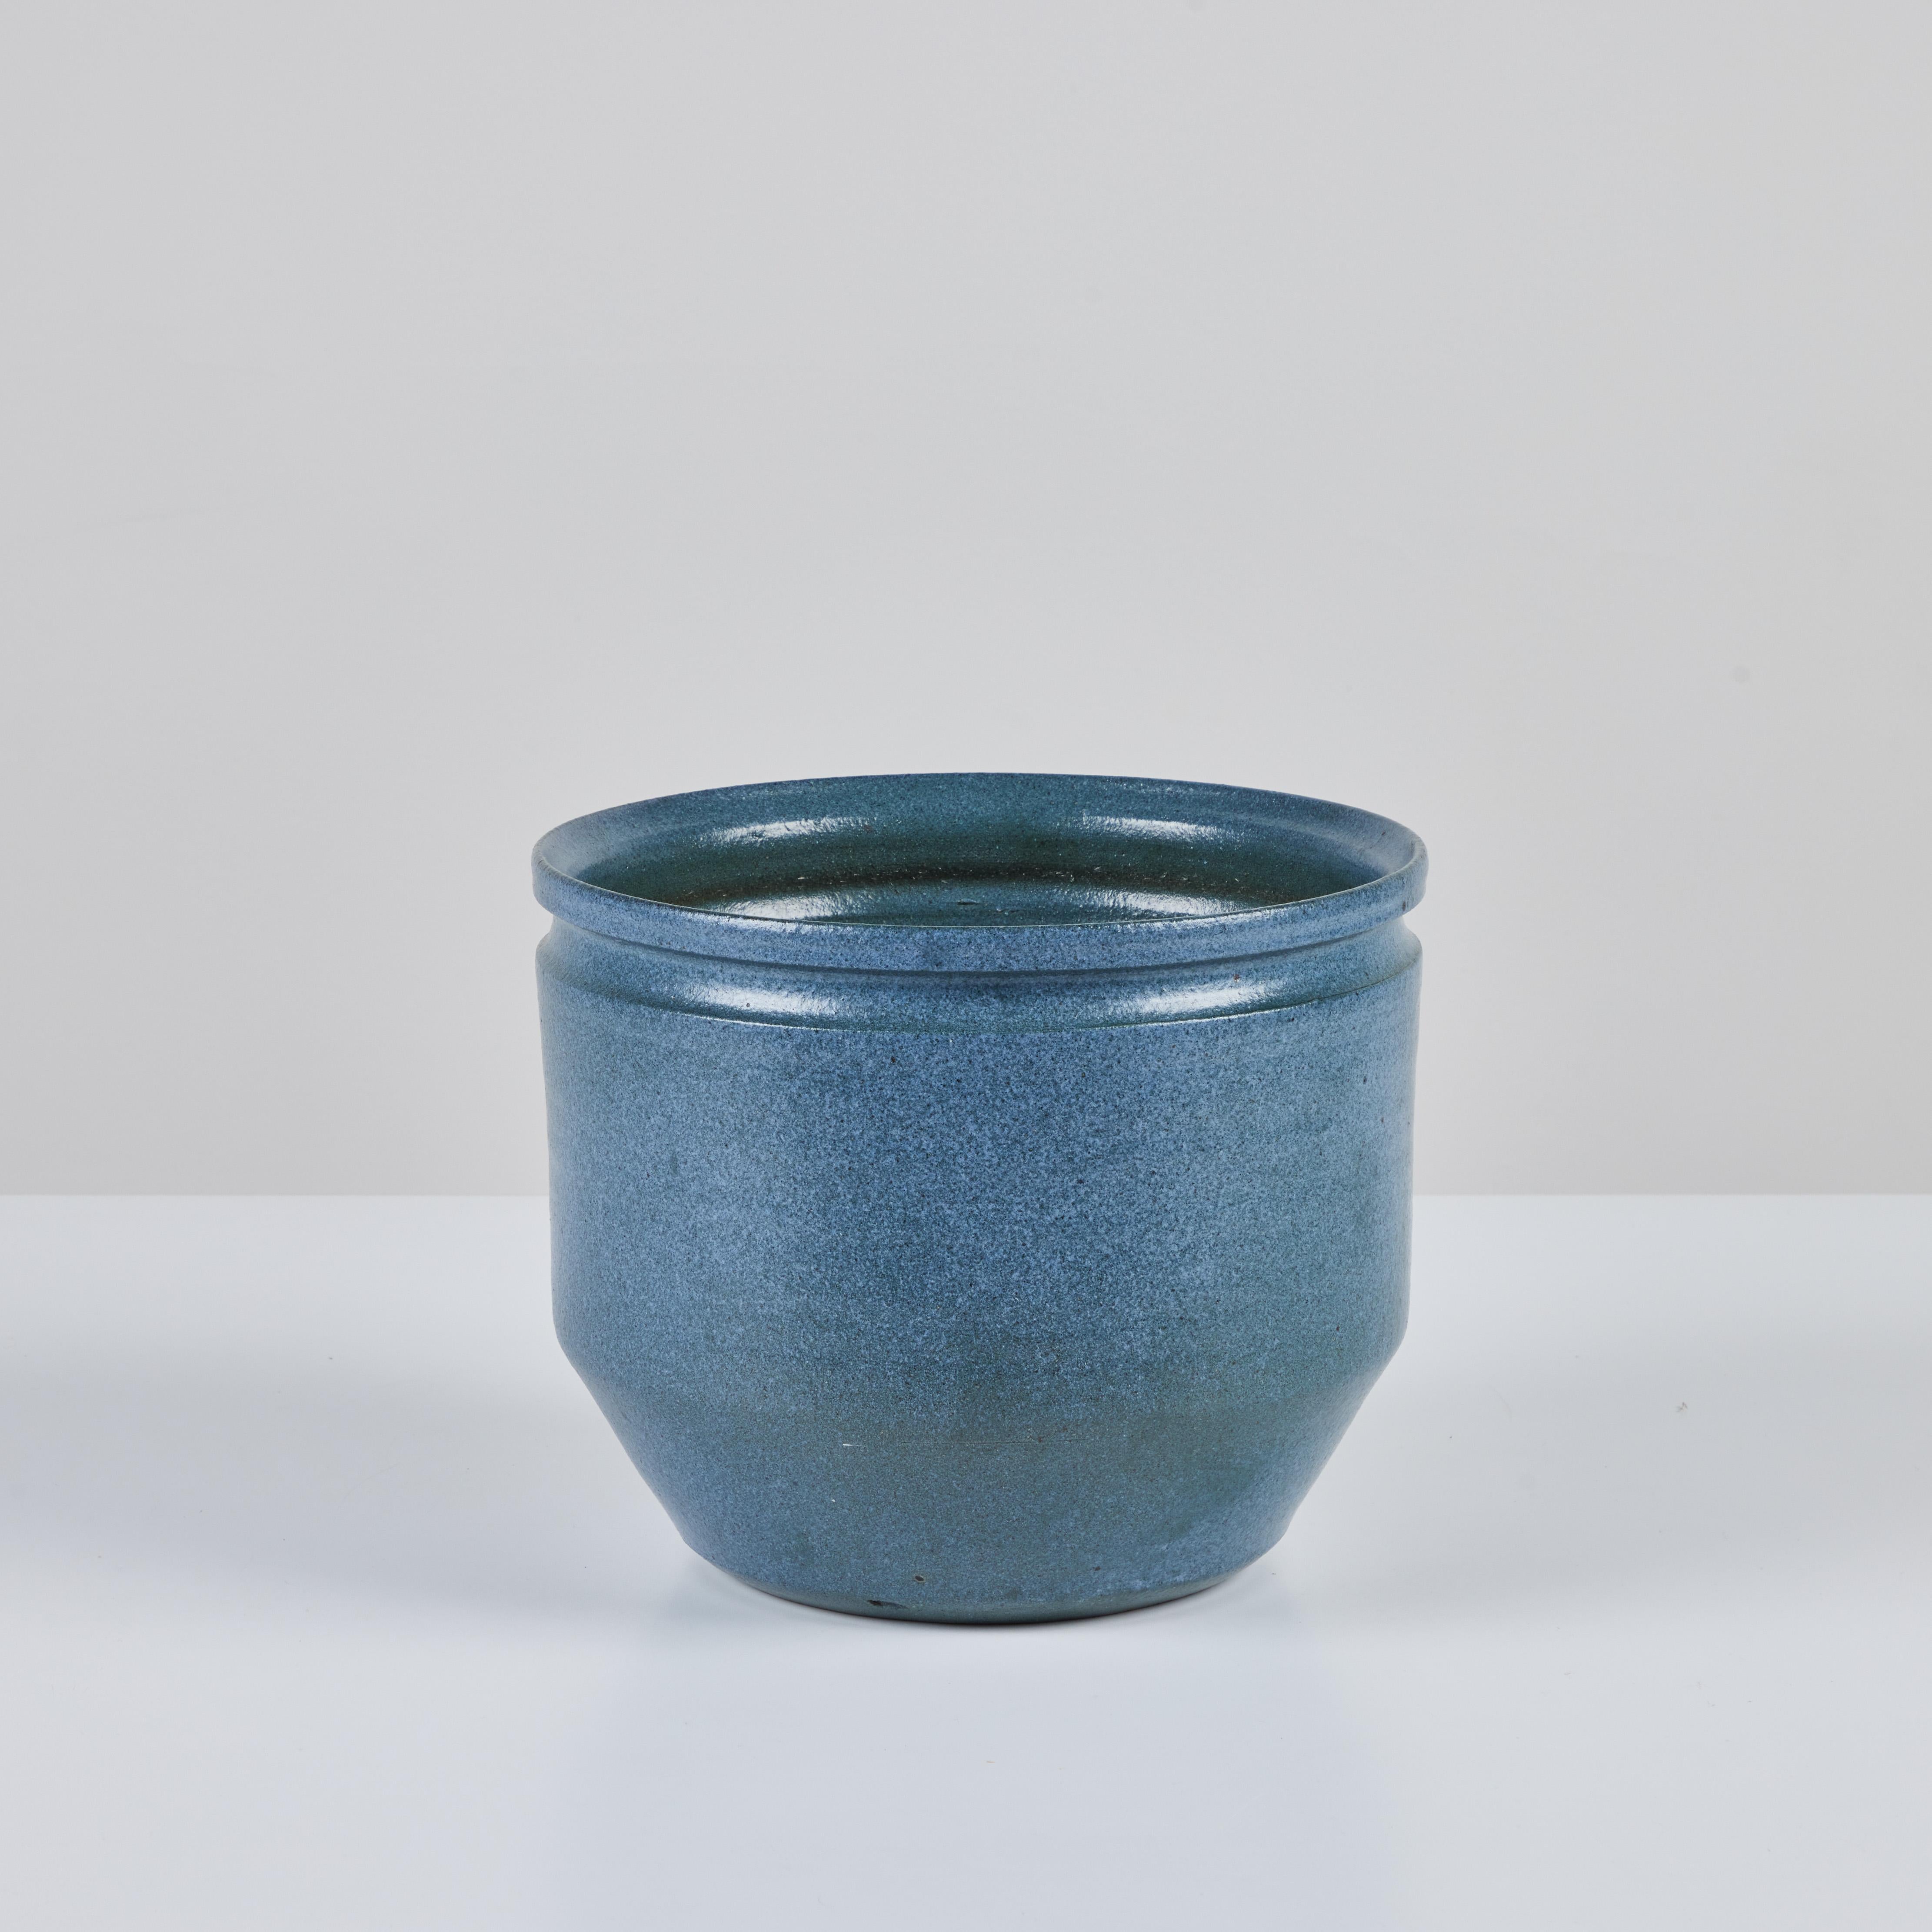 20th Century David Cressey and Robert Maxwell Blue Speckle Glazed Planter for Earthgender